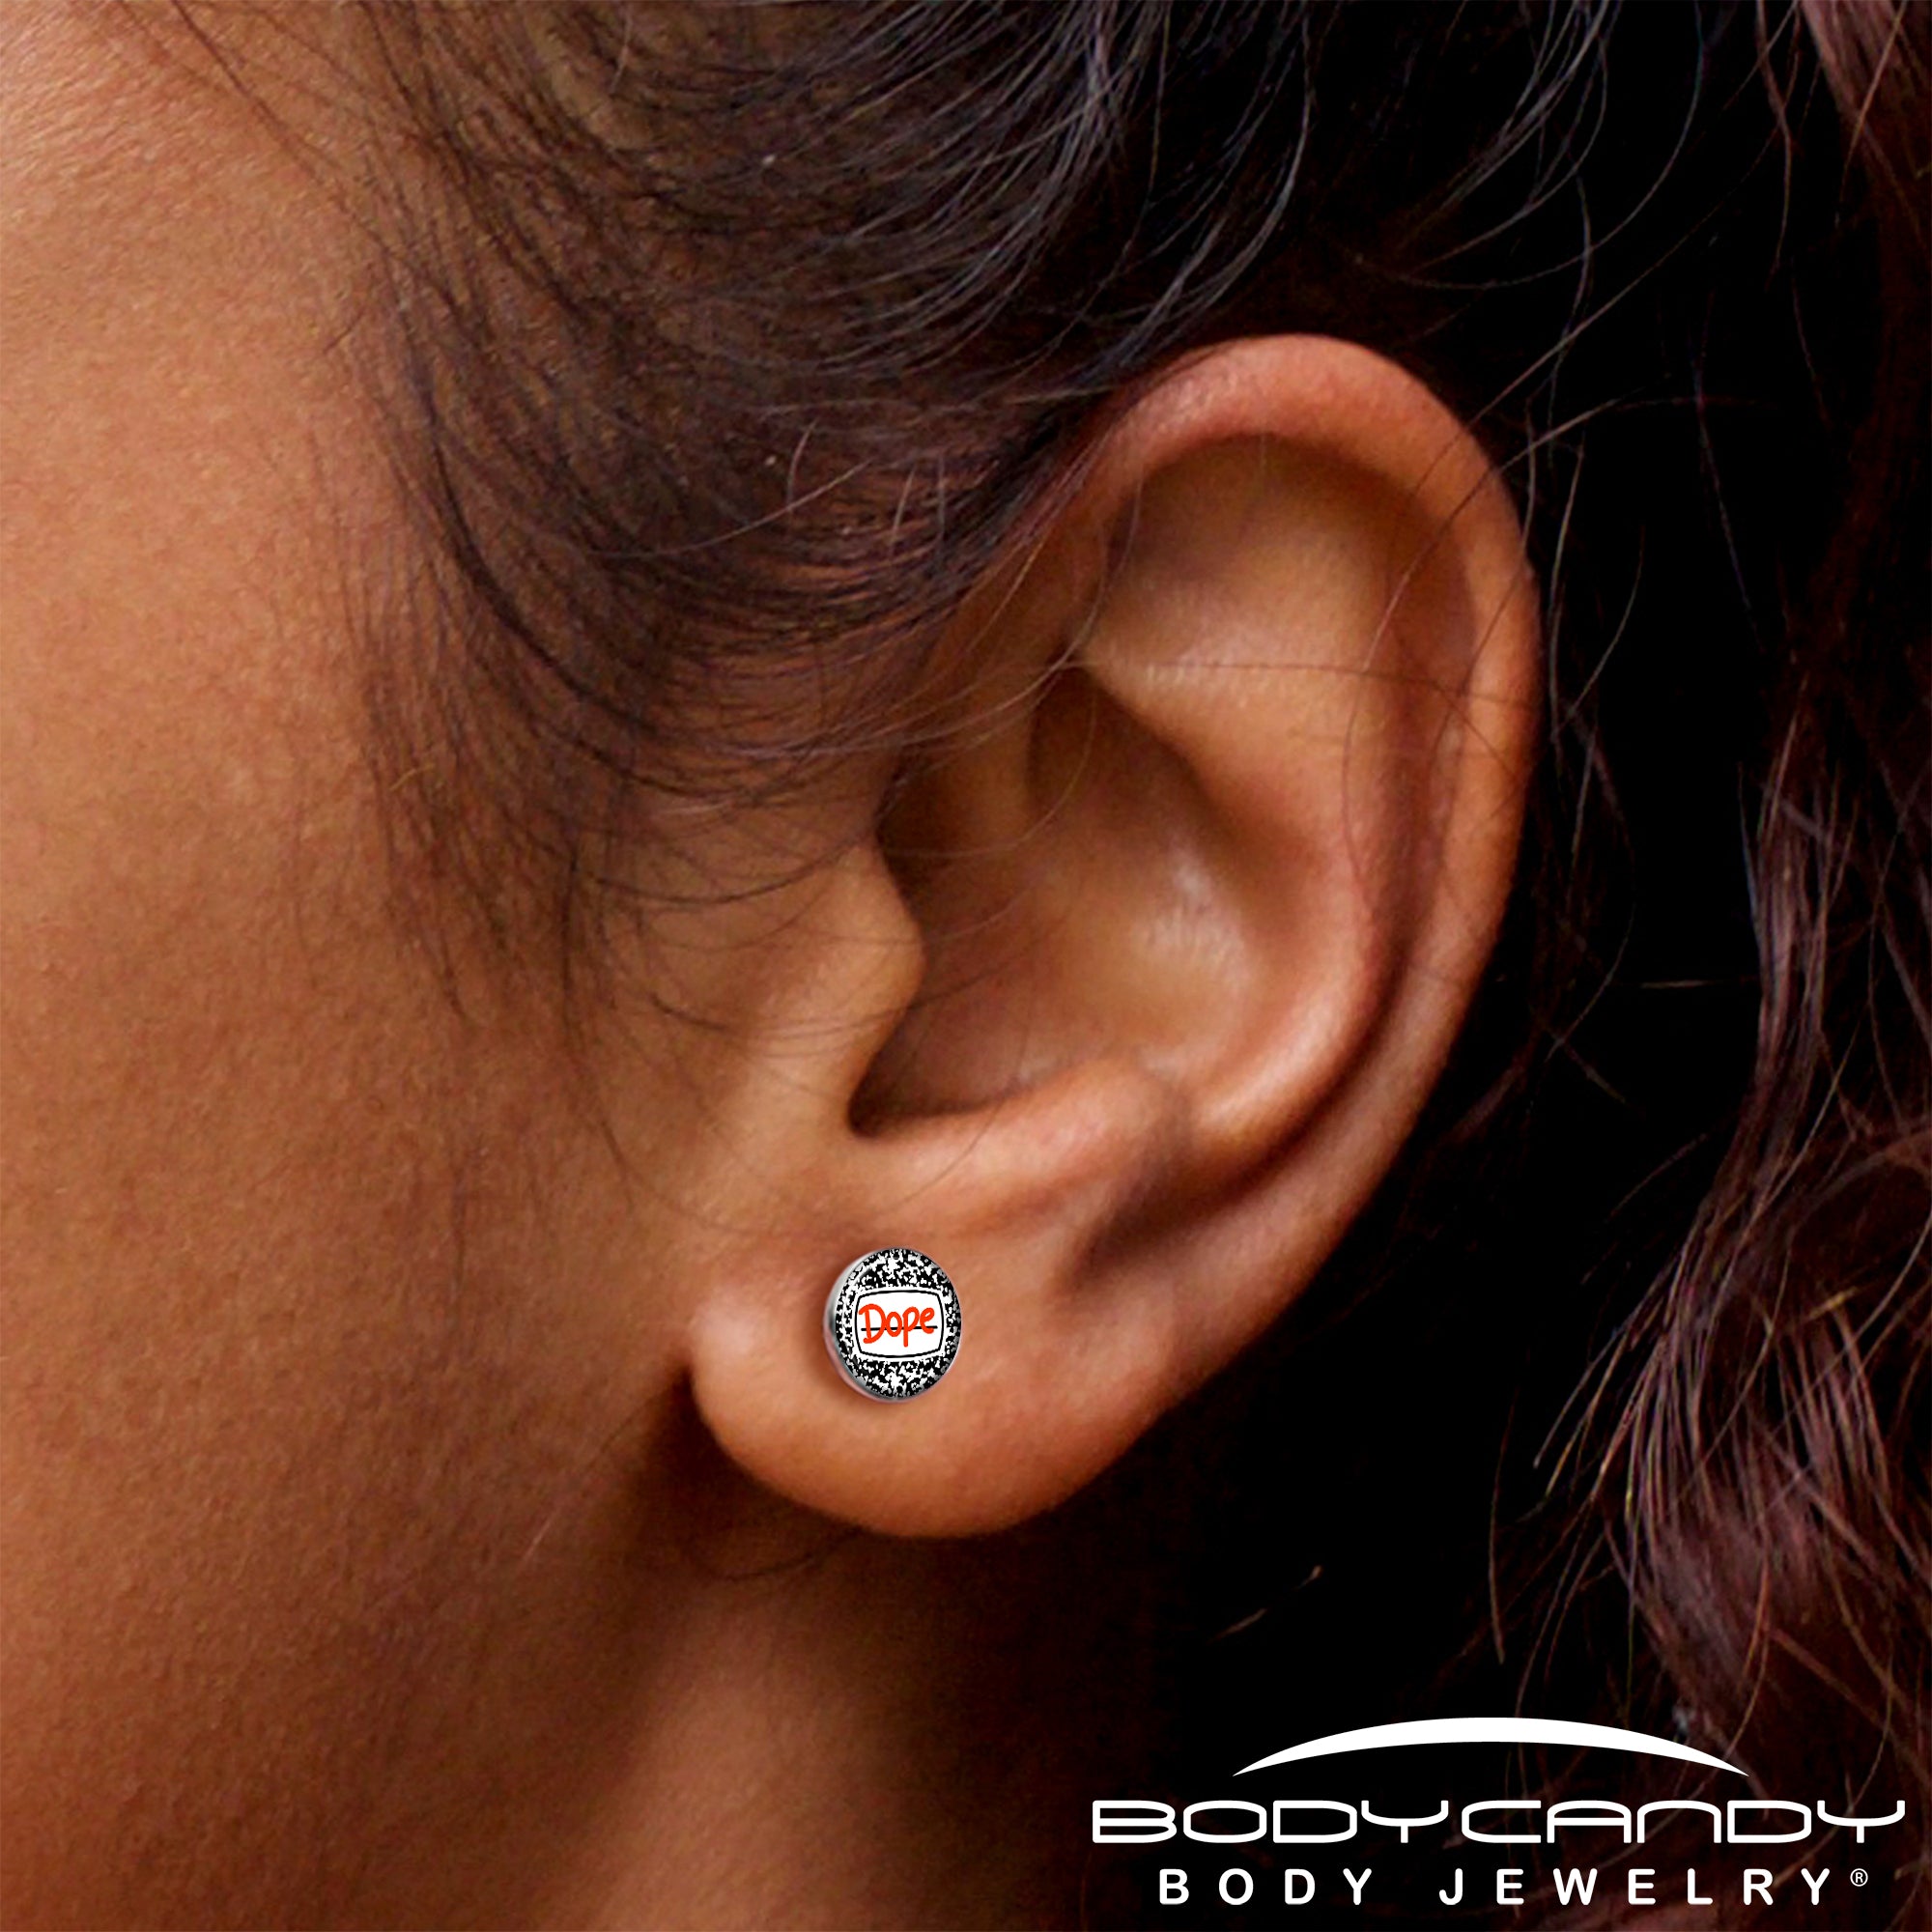 Dope Composition Notebook Stud Earrings